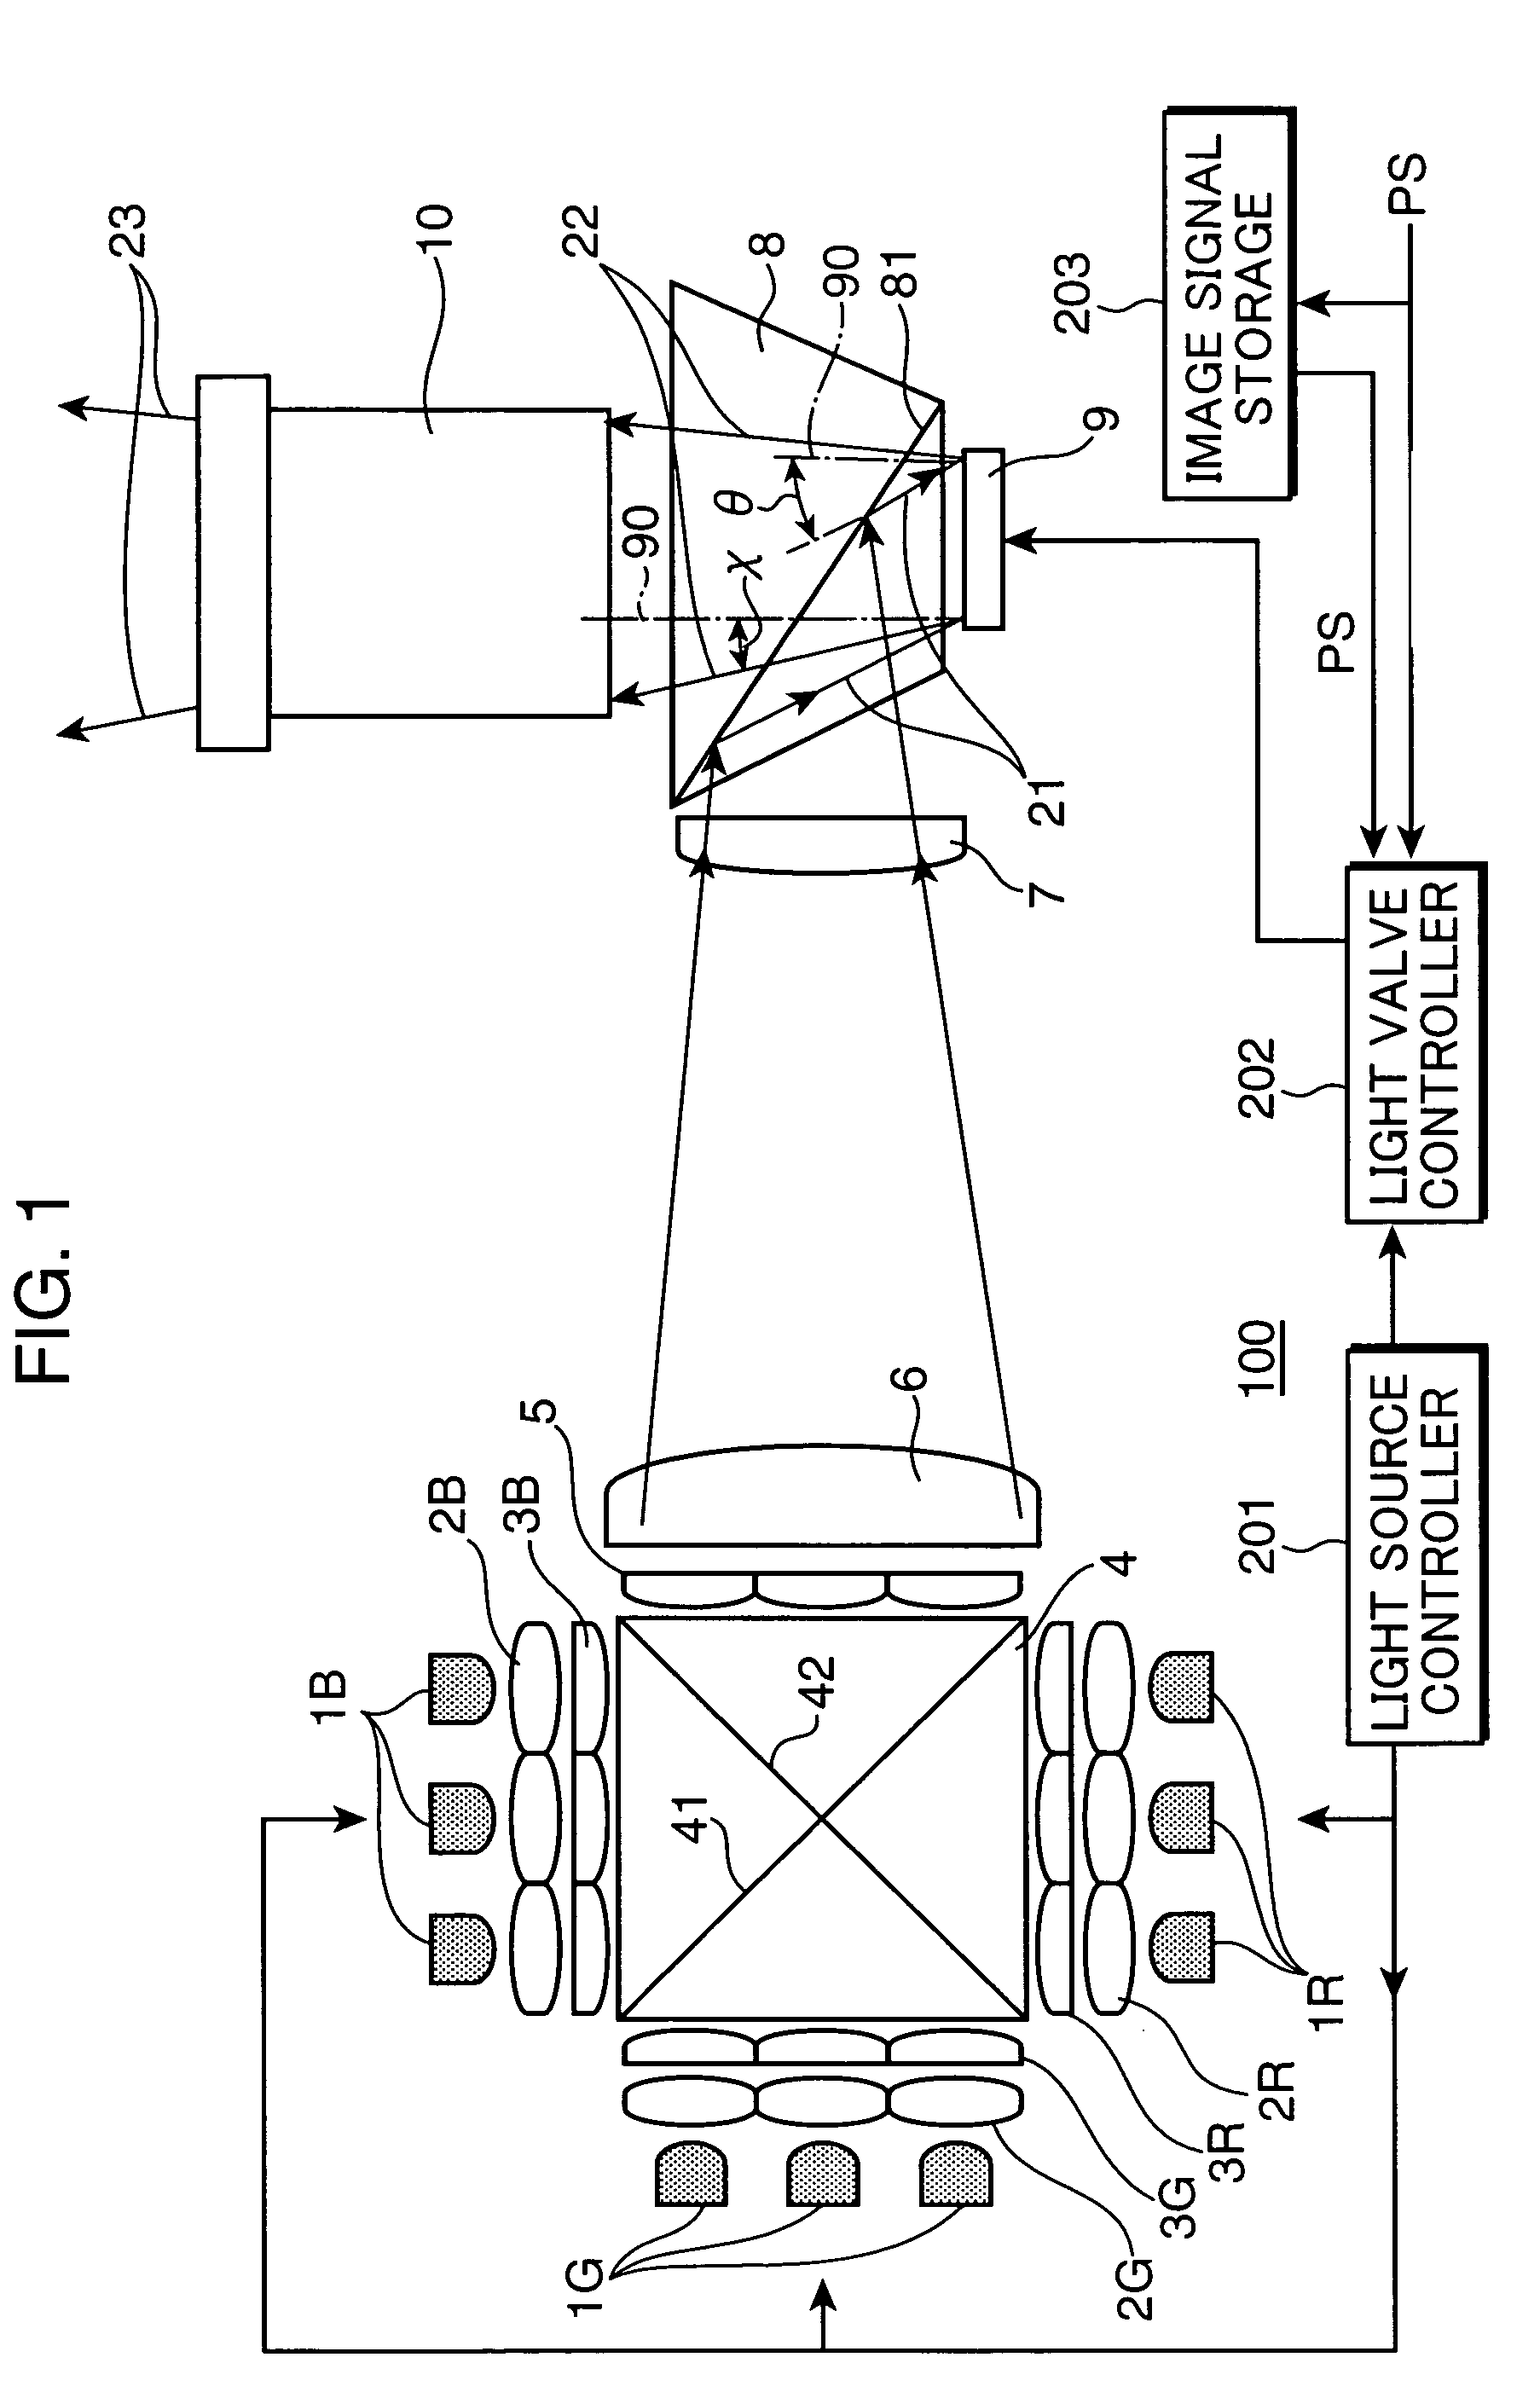 Illumination apparatus and video projection display system